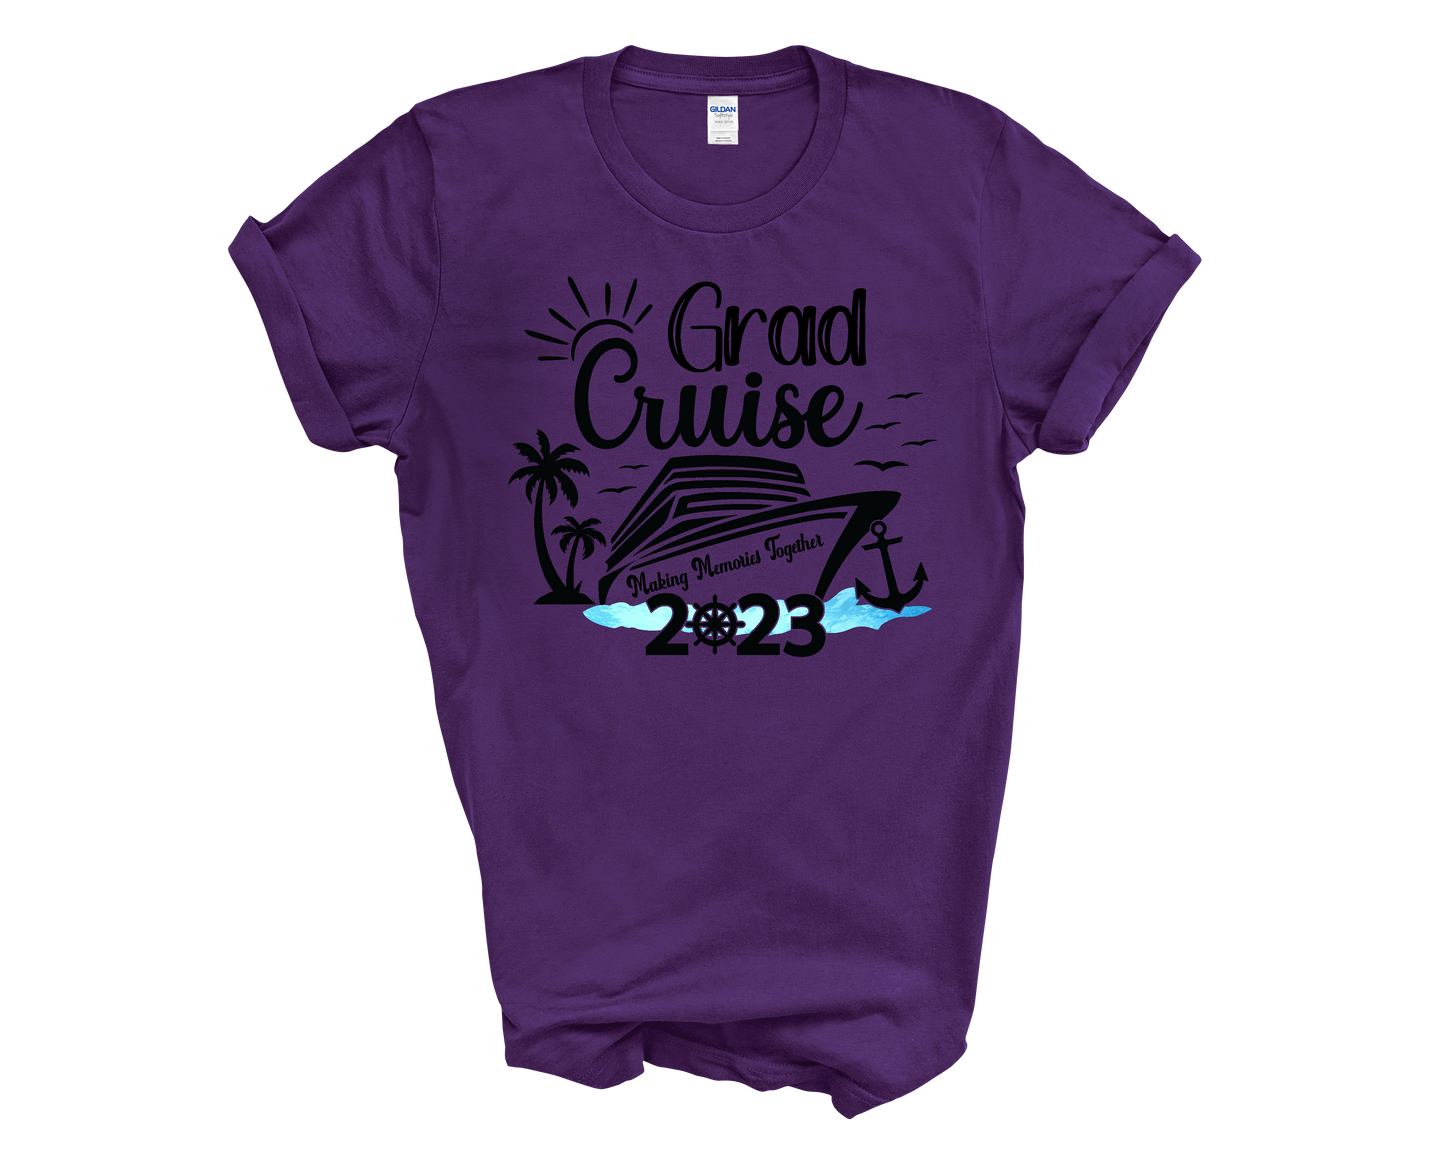 Grad Cruise Making Memories Together Youth Cotton T-shirt